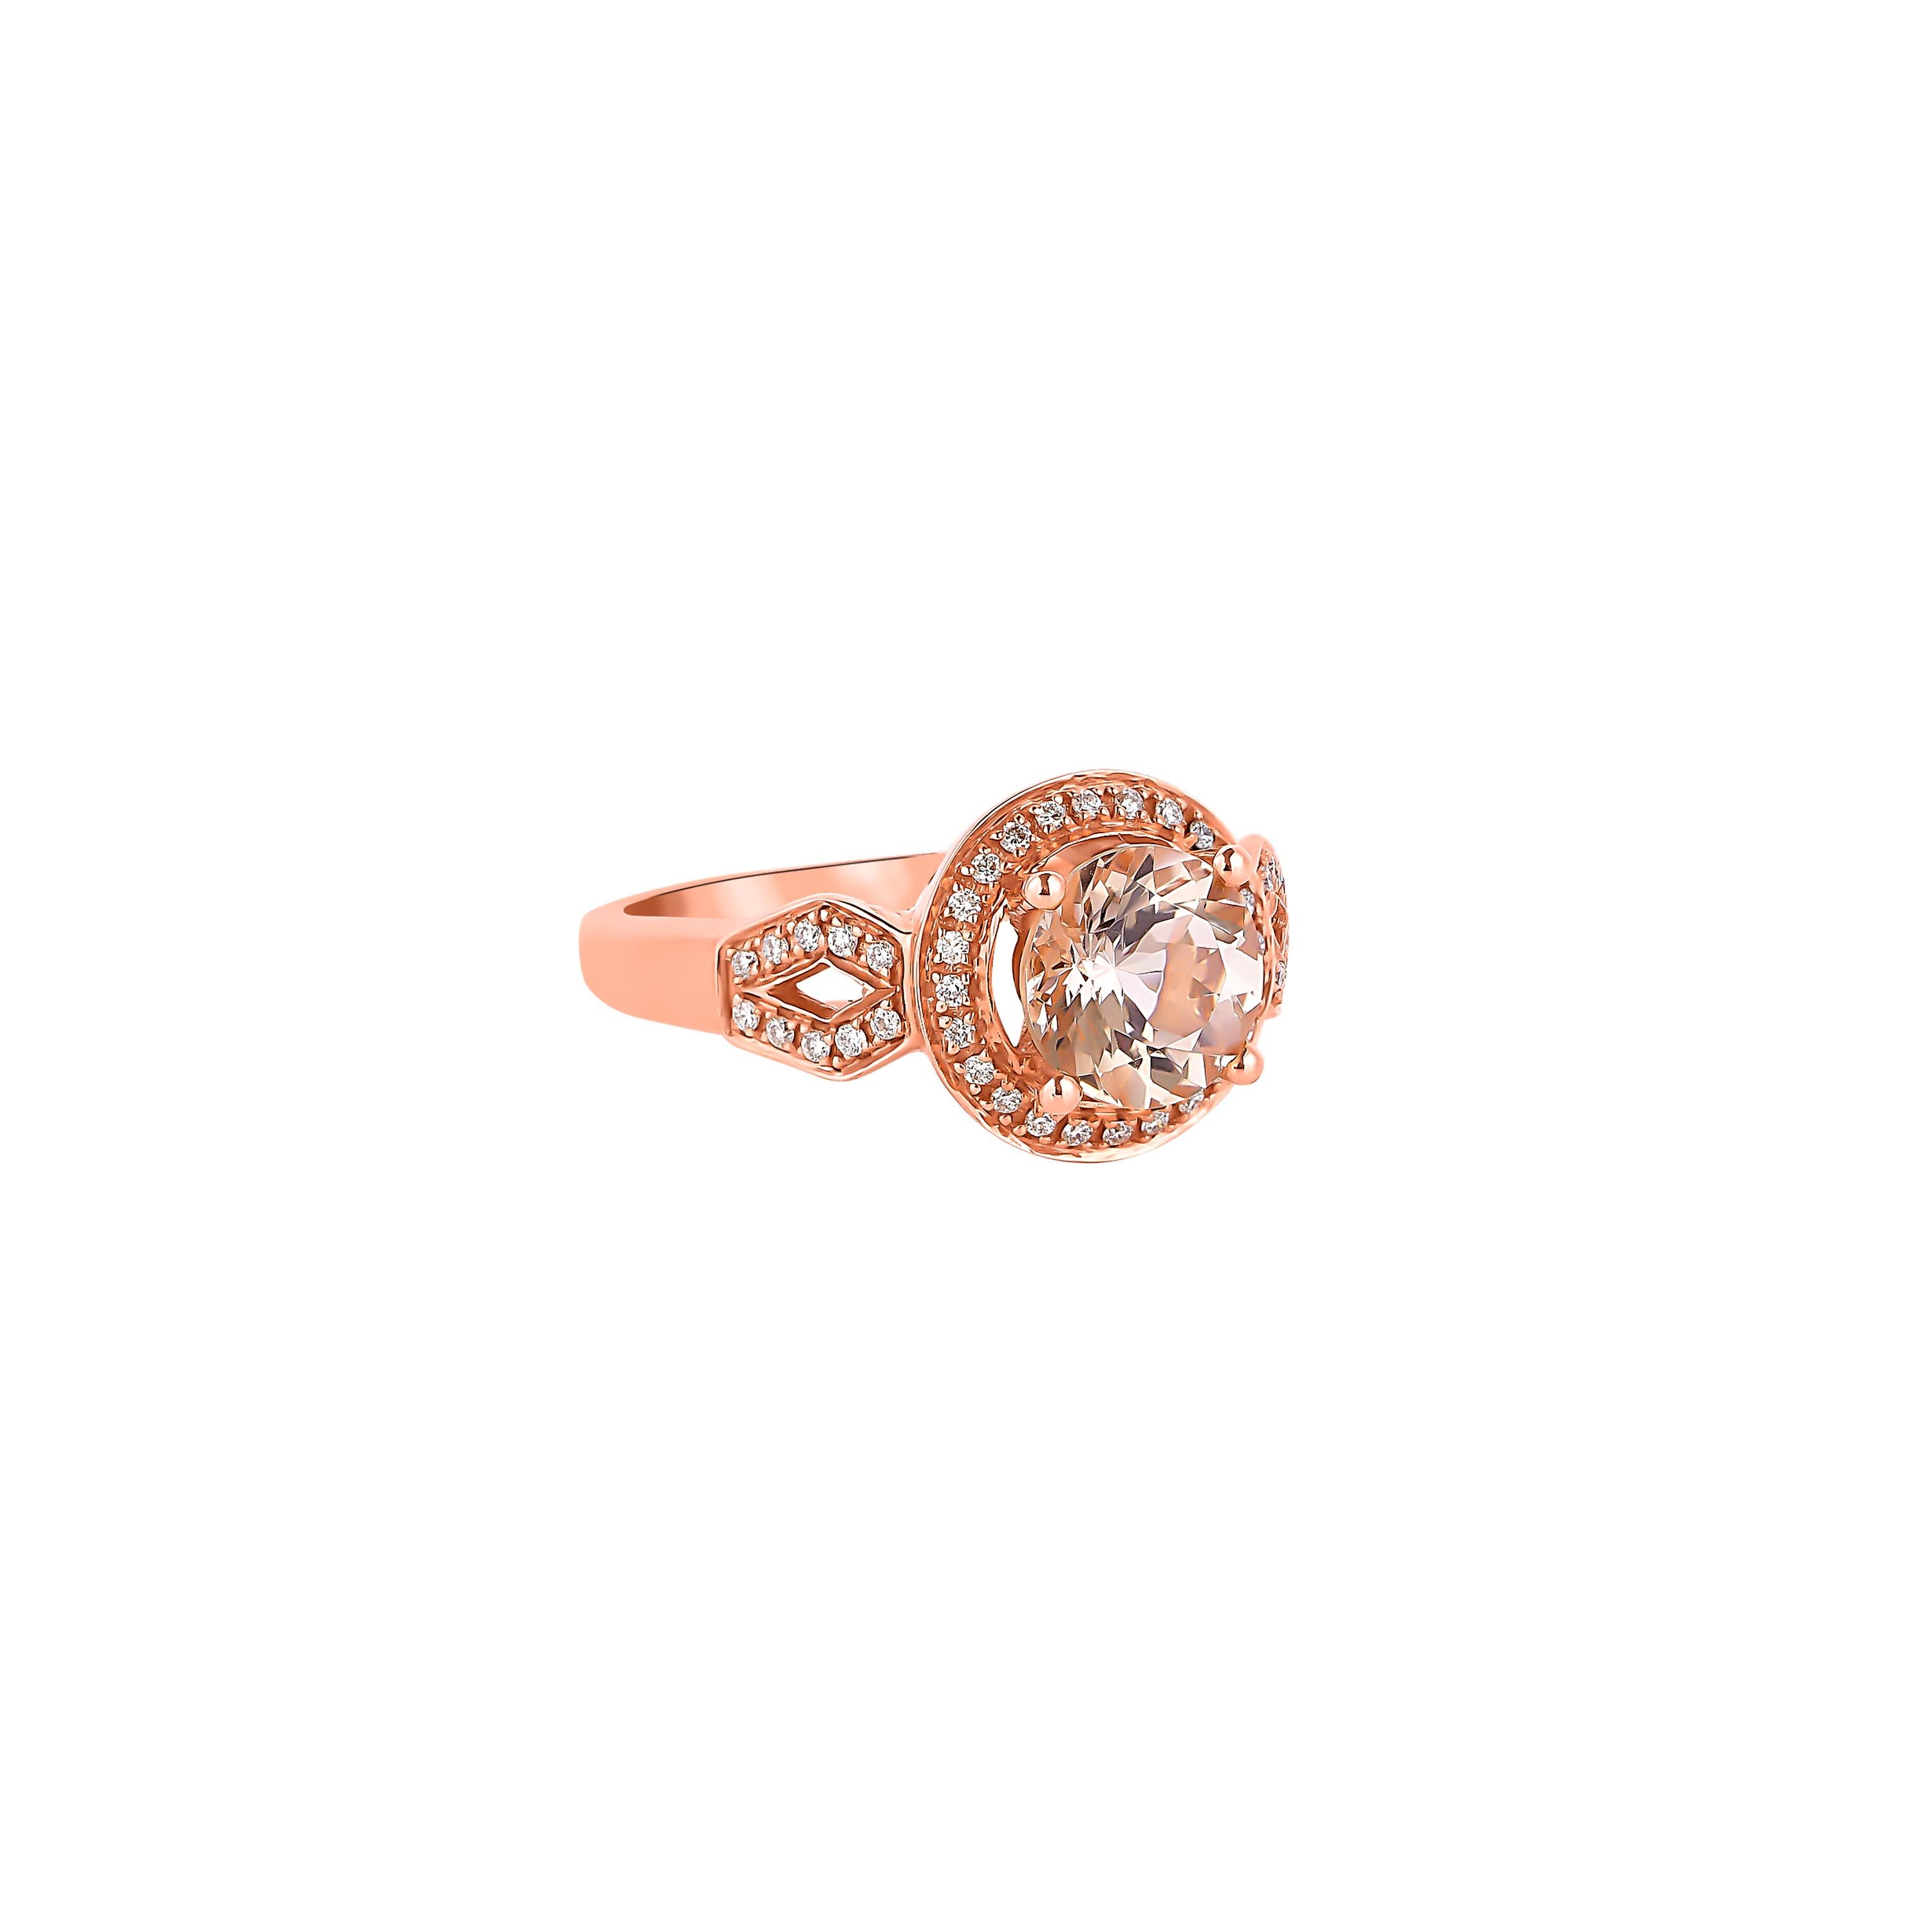 This collection features an array of magnificent morganites! Accented with diamonds these rings are made in rose gold and present a classic yet elegant look. 

Classic morganite ring in 18K rose gold with diamonds. 

Morganite: 1.79 carat round